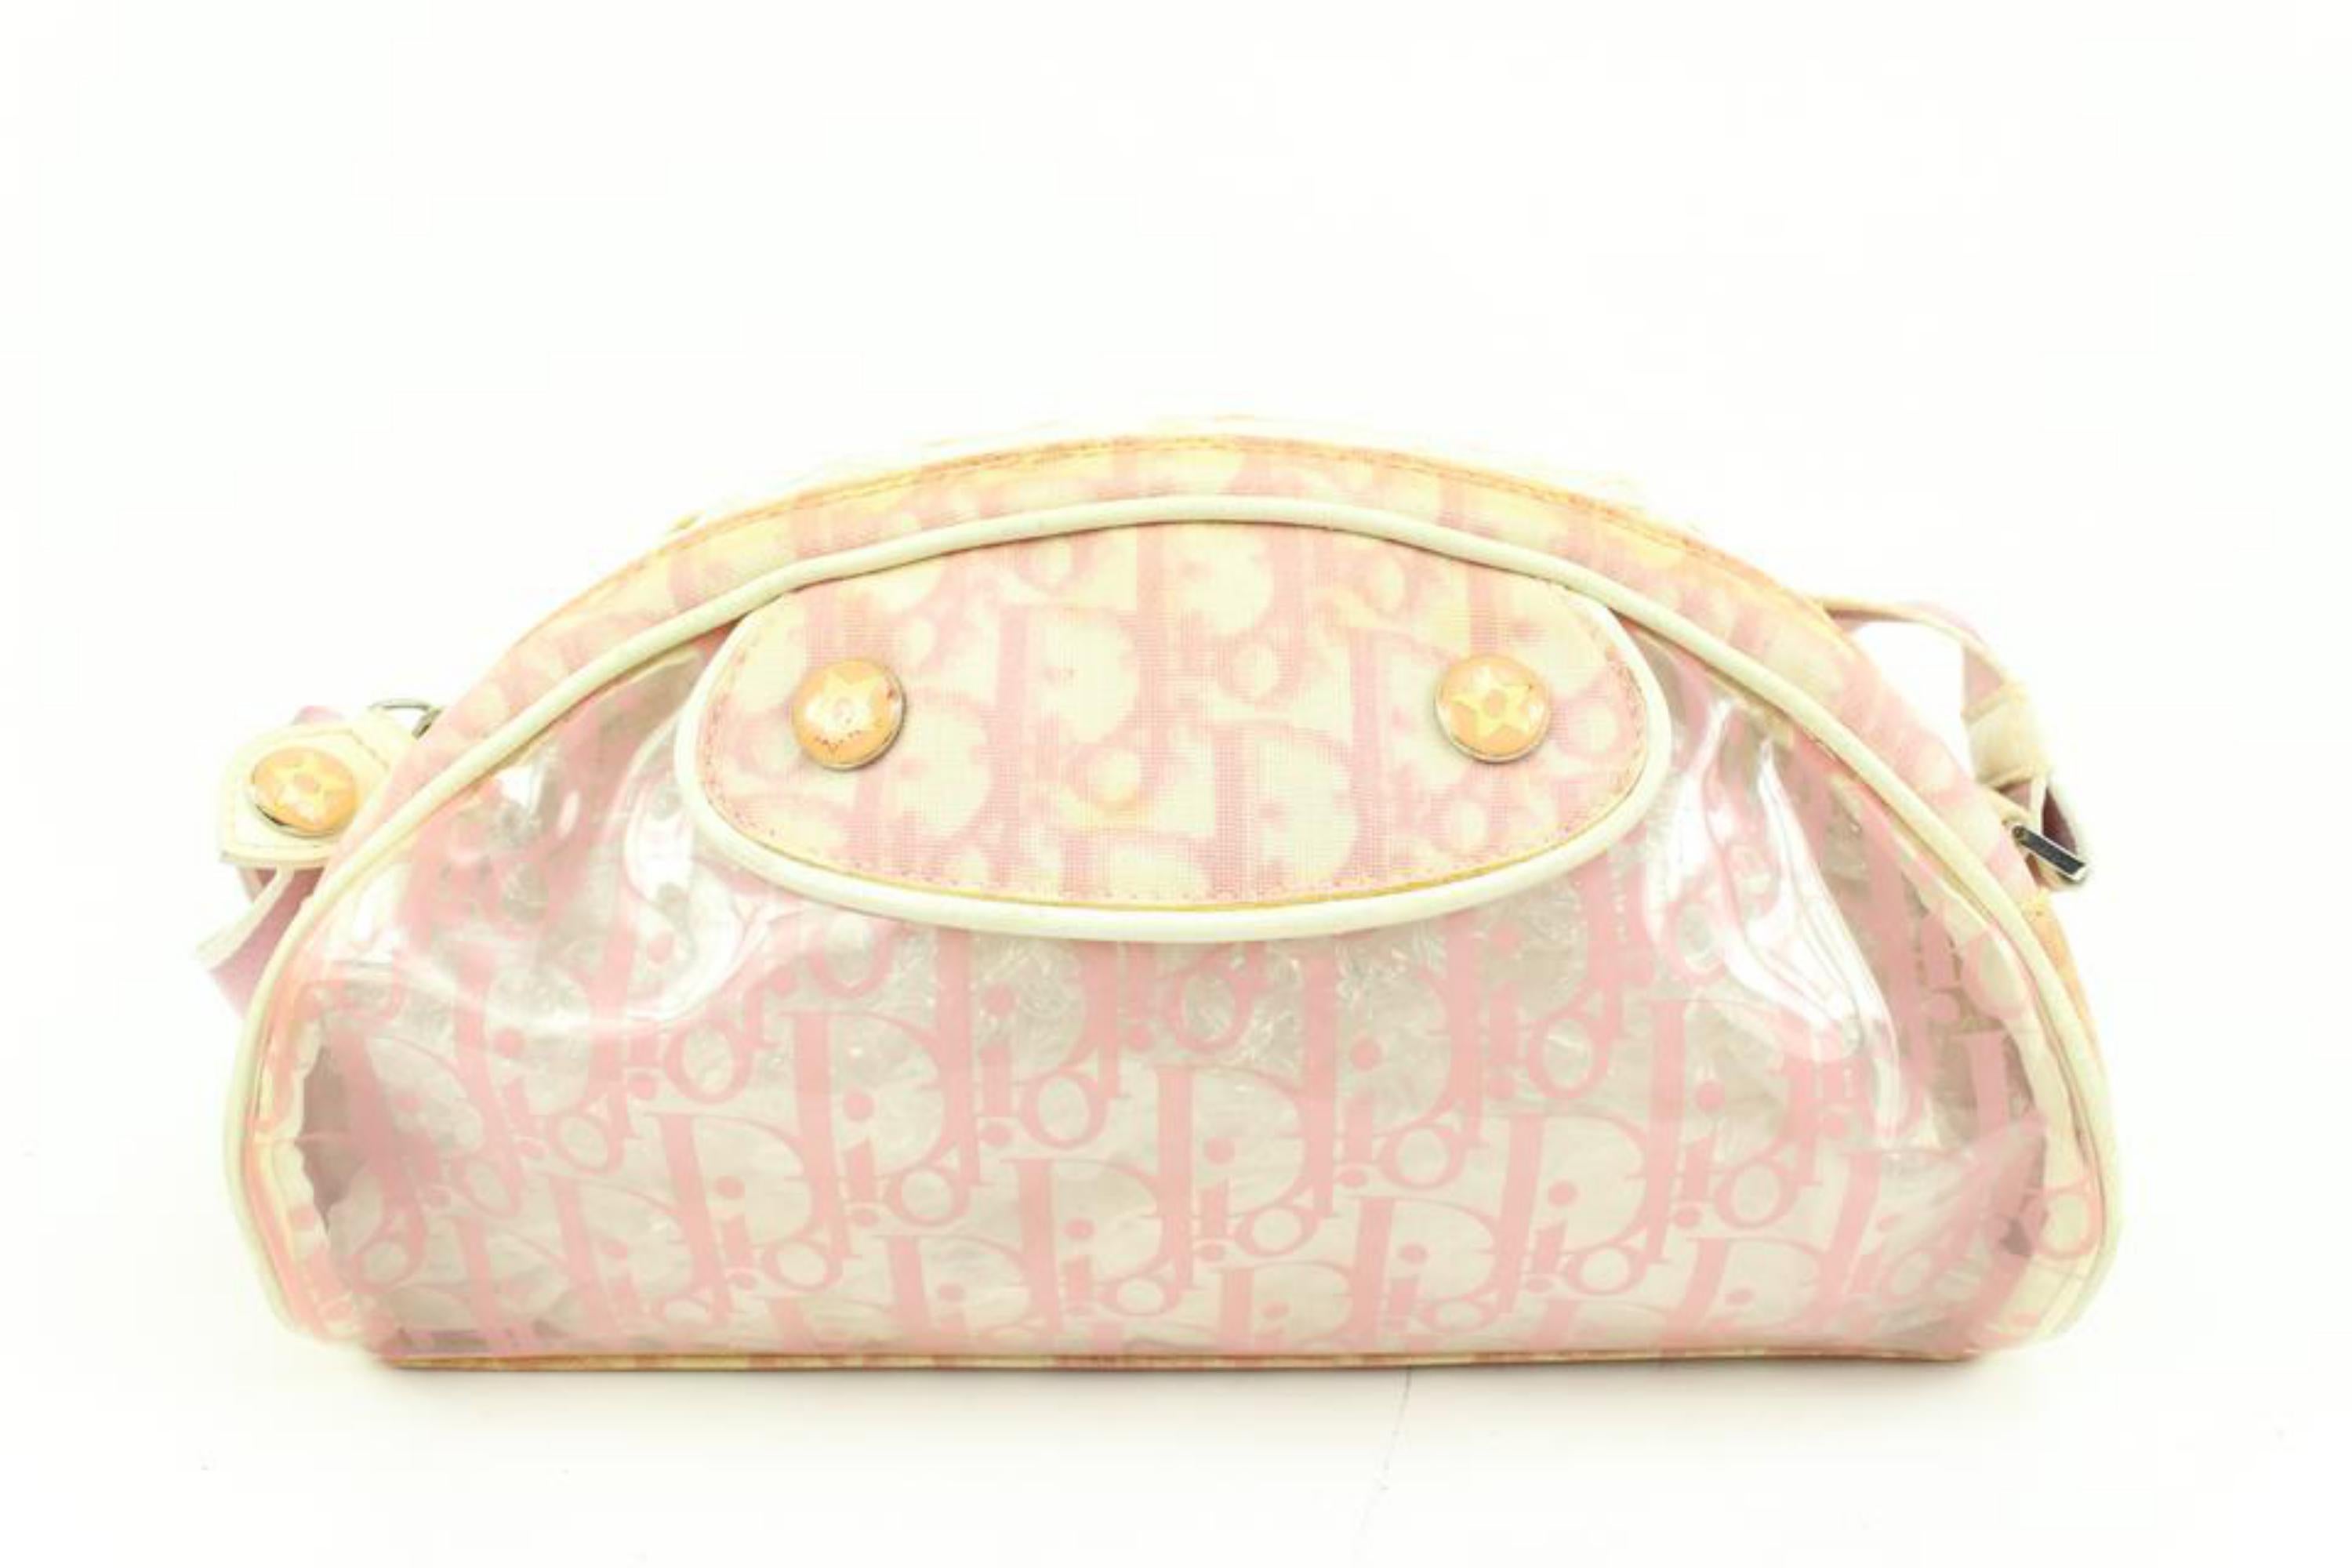 Dior Pink Translucent Monogram Trotter Crossbody Bag  31d413s In Fair Condition For Sale In Dix hills, NY